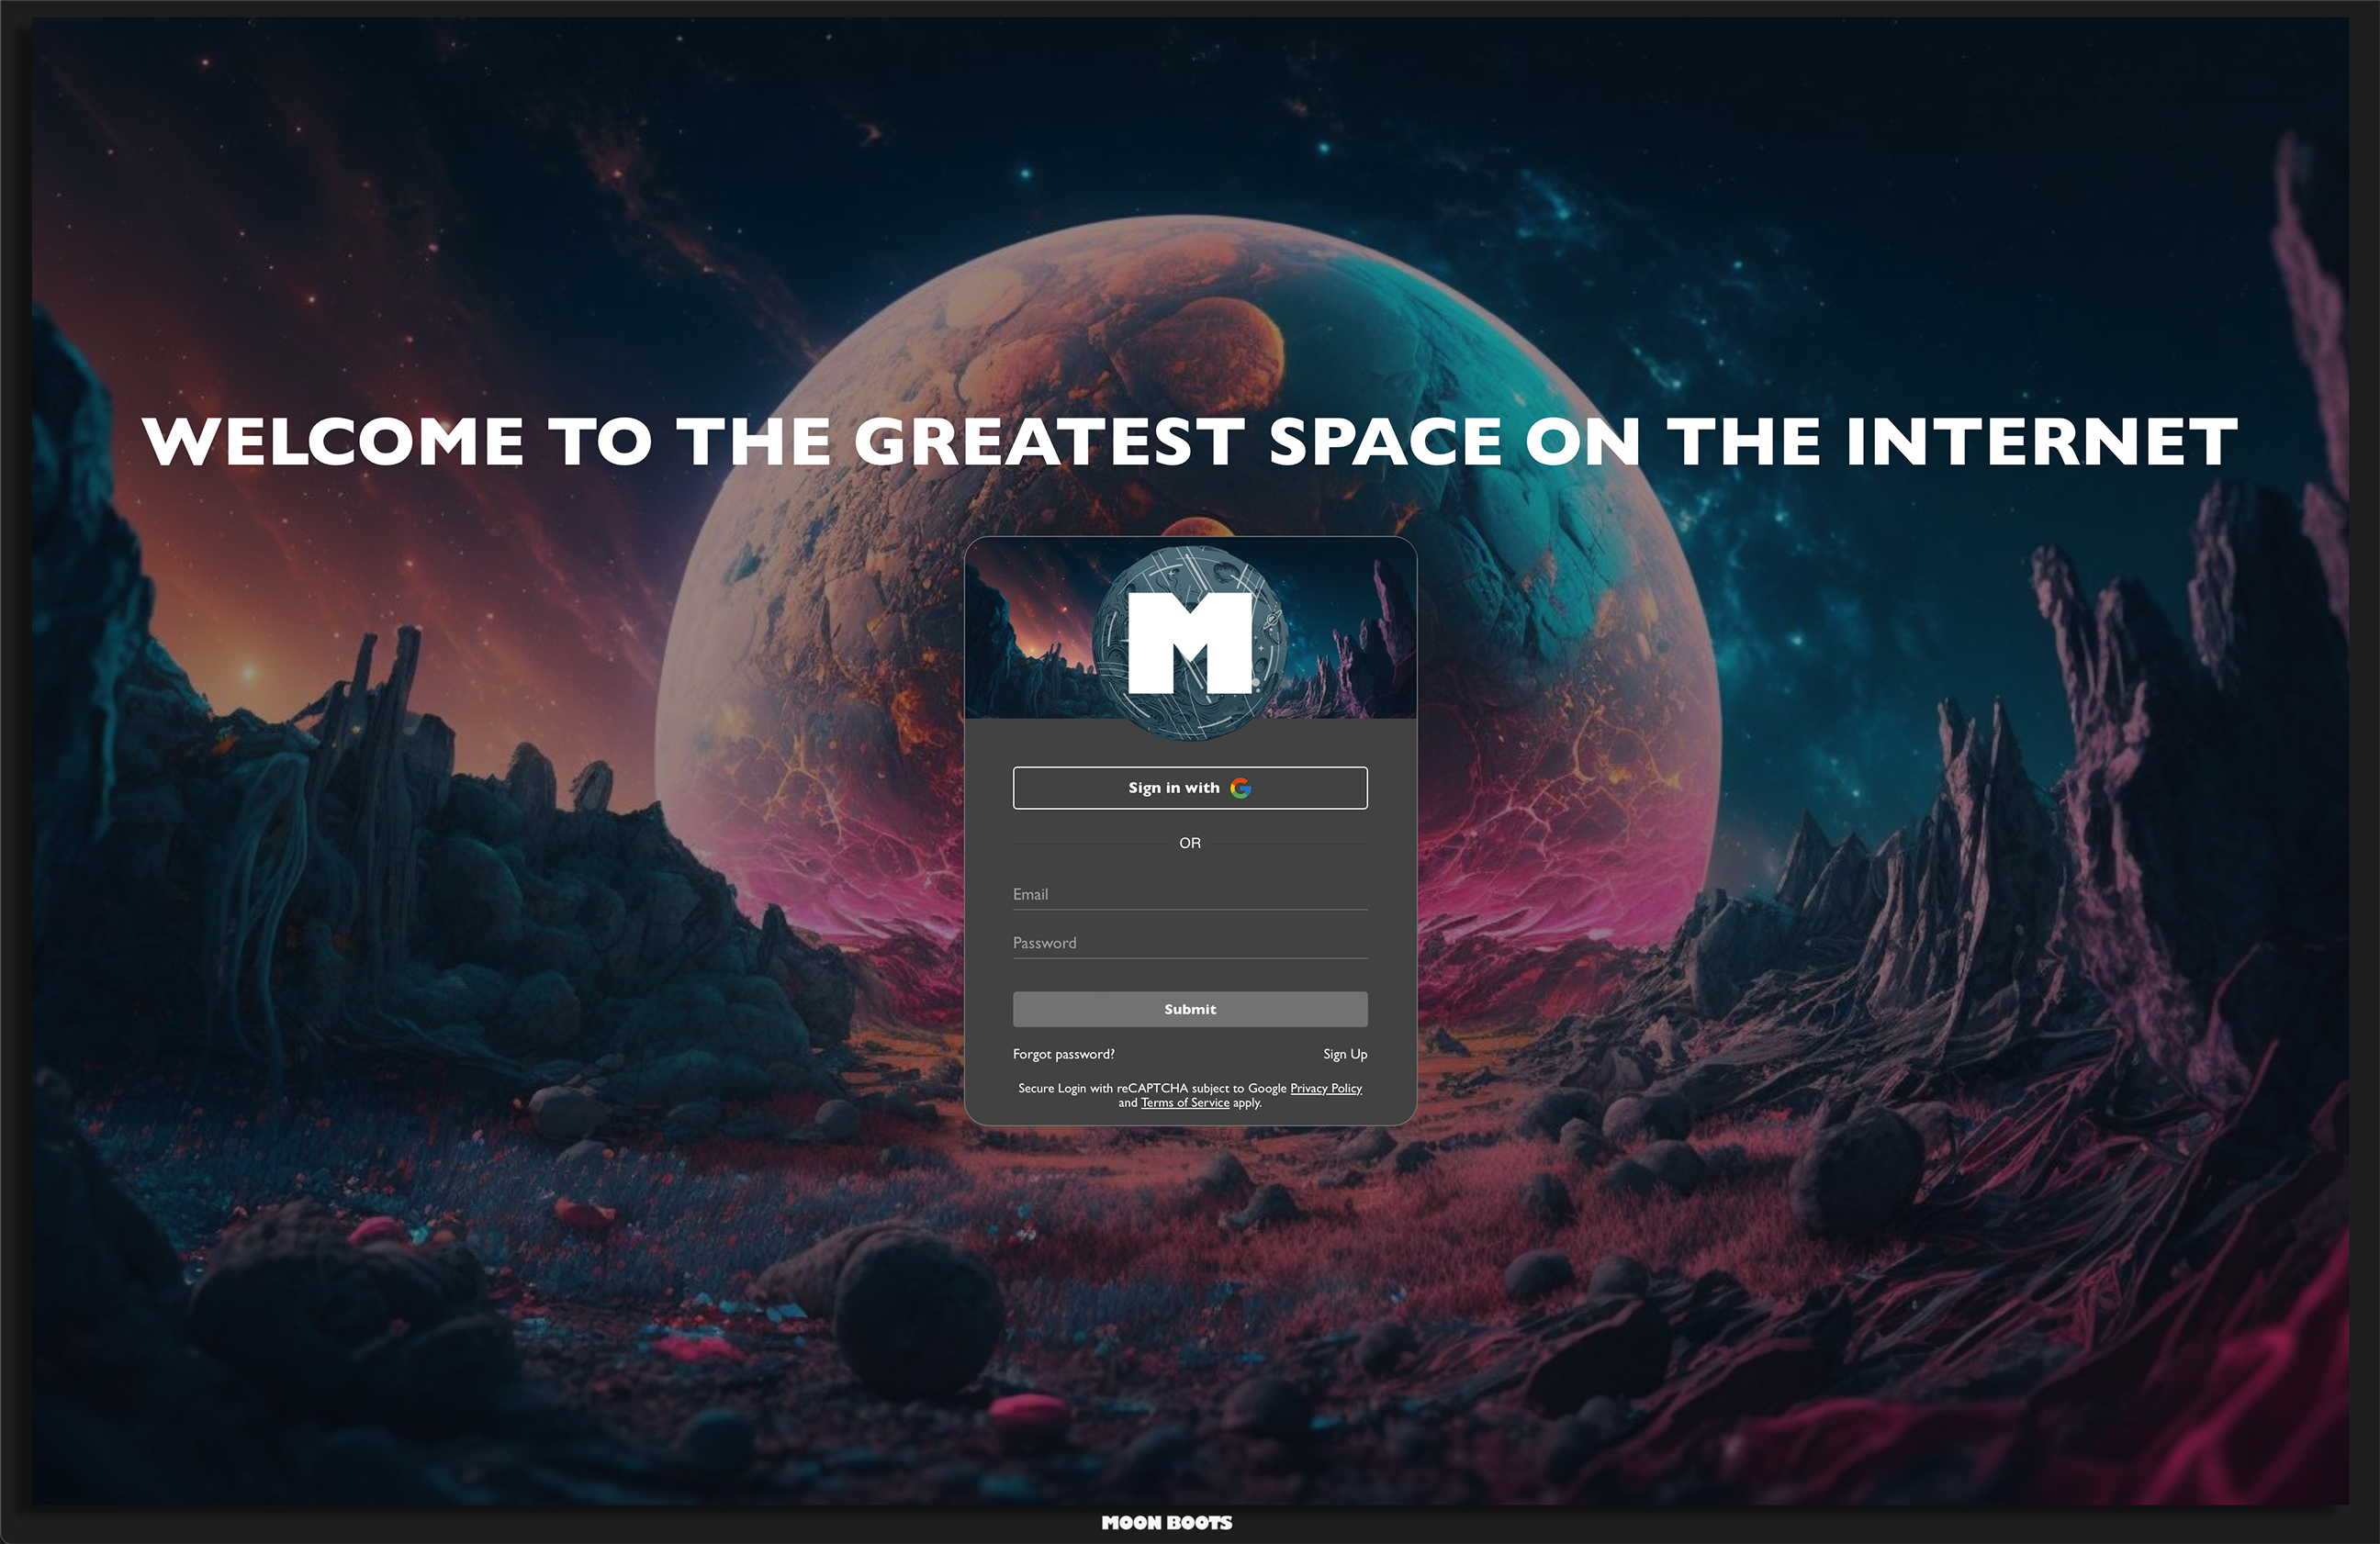 This is a creative log in screen of a platform showing off the customization options. With the theme you can add custom fonts, branding, colors, and imagery to create a one-of-a-kind space. Not the creative type? Choose from 18 existing themes.